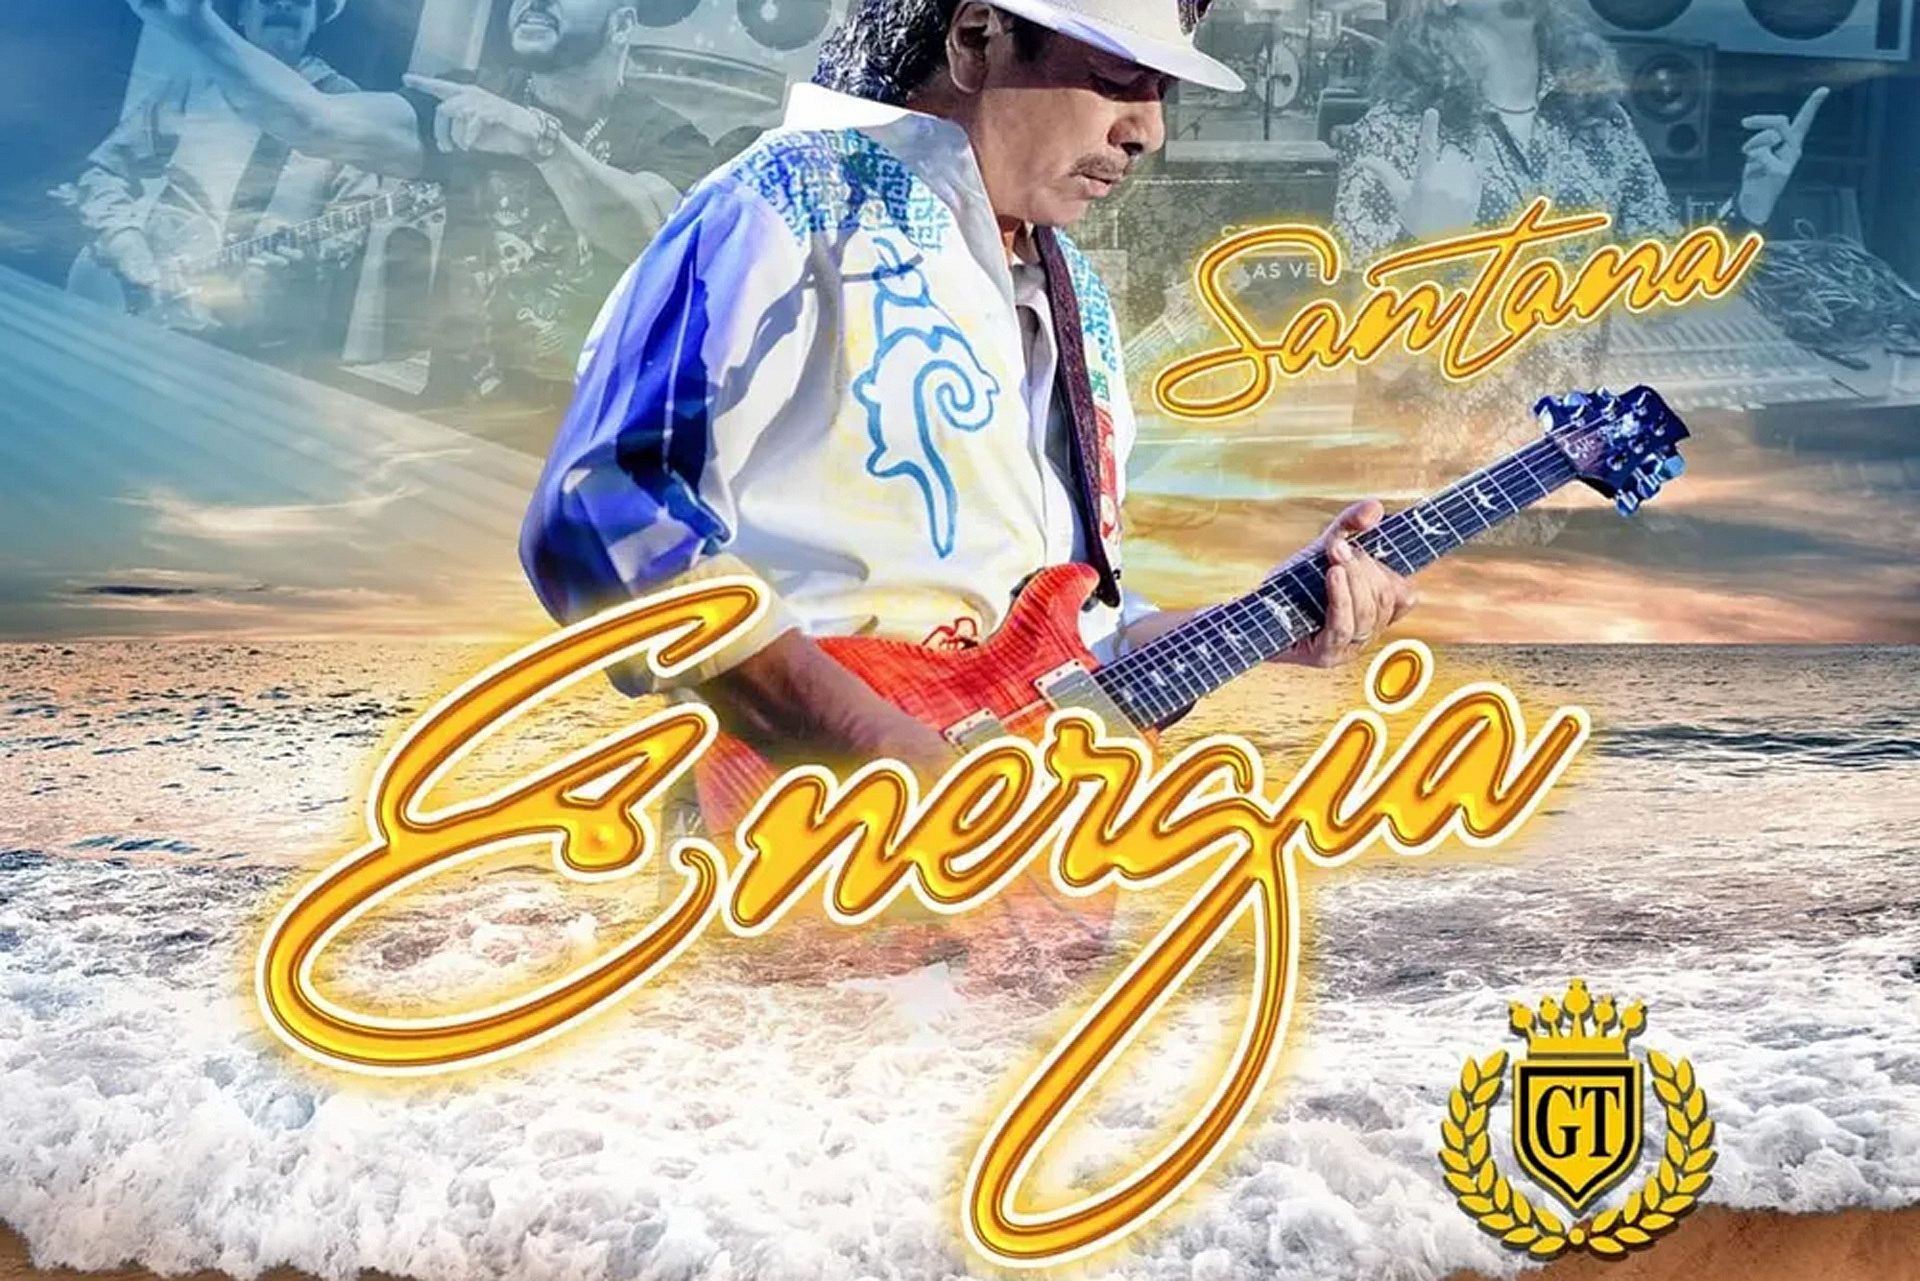 Santana Releases “Energía” with Son and Nephew